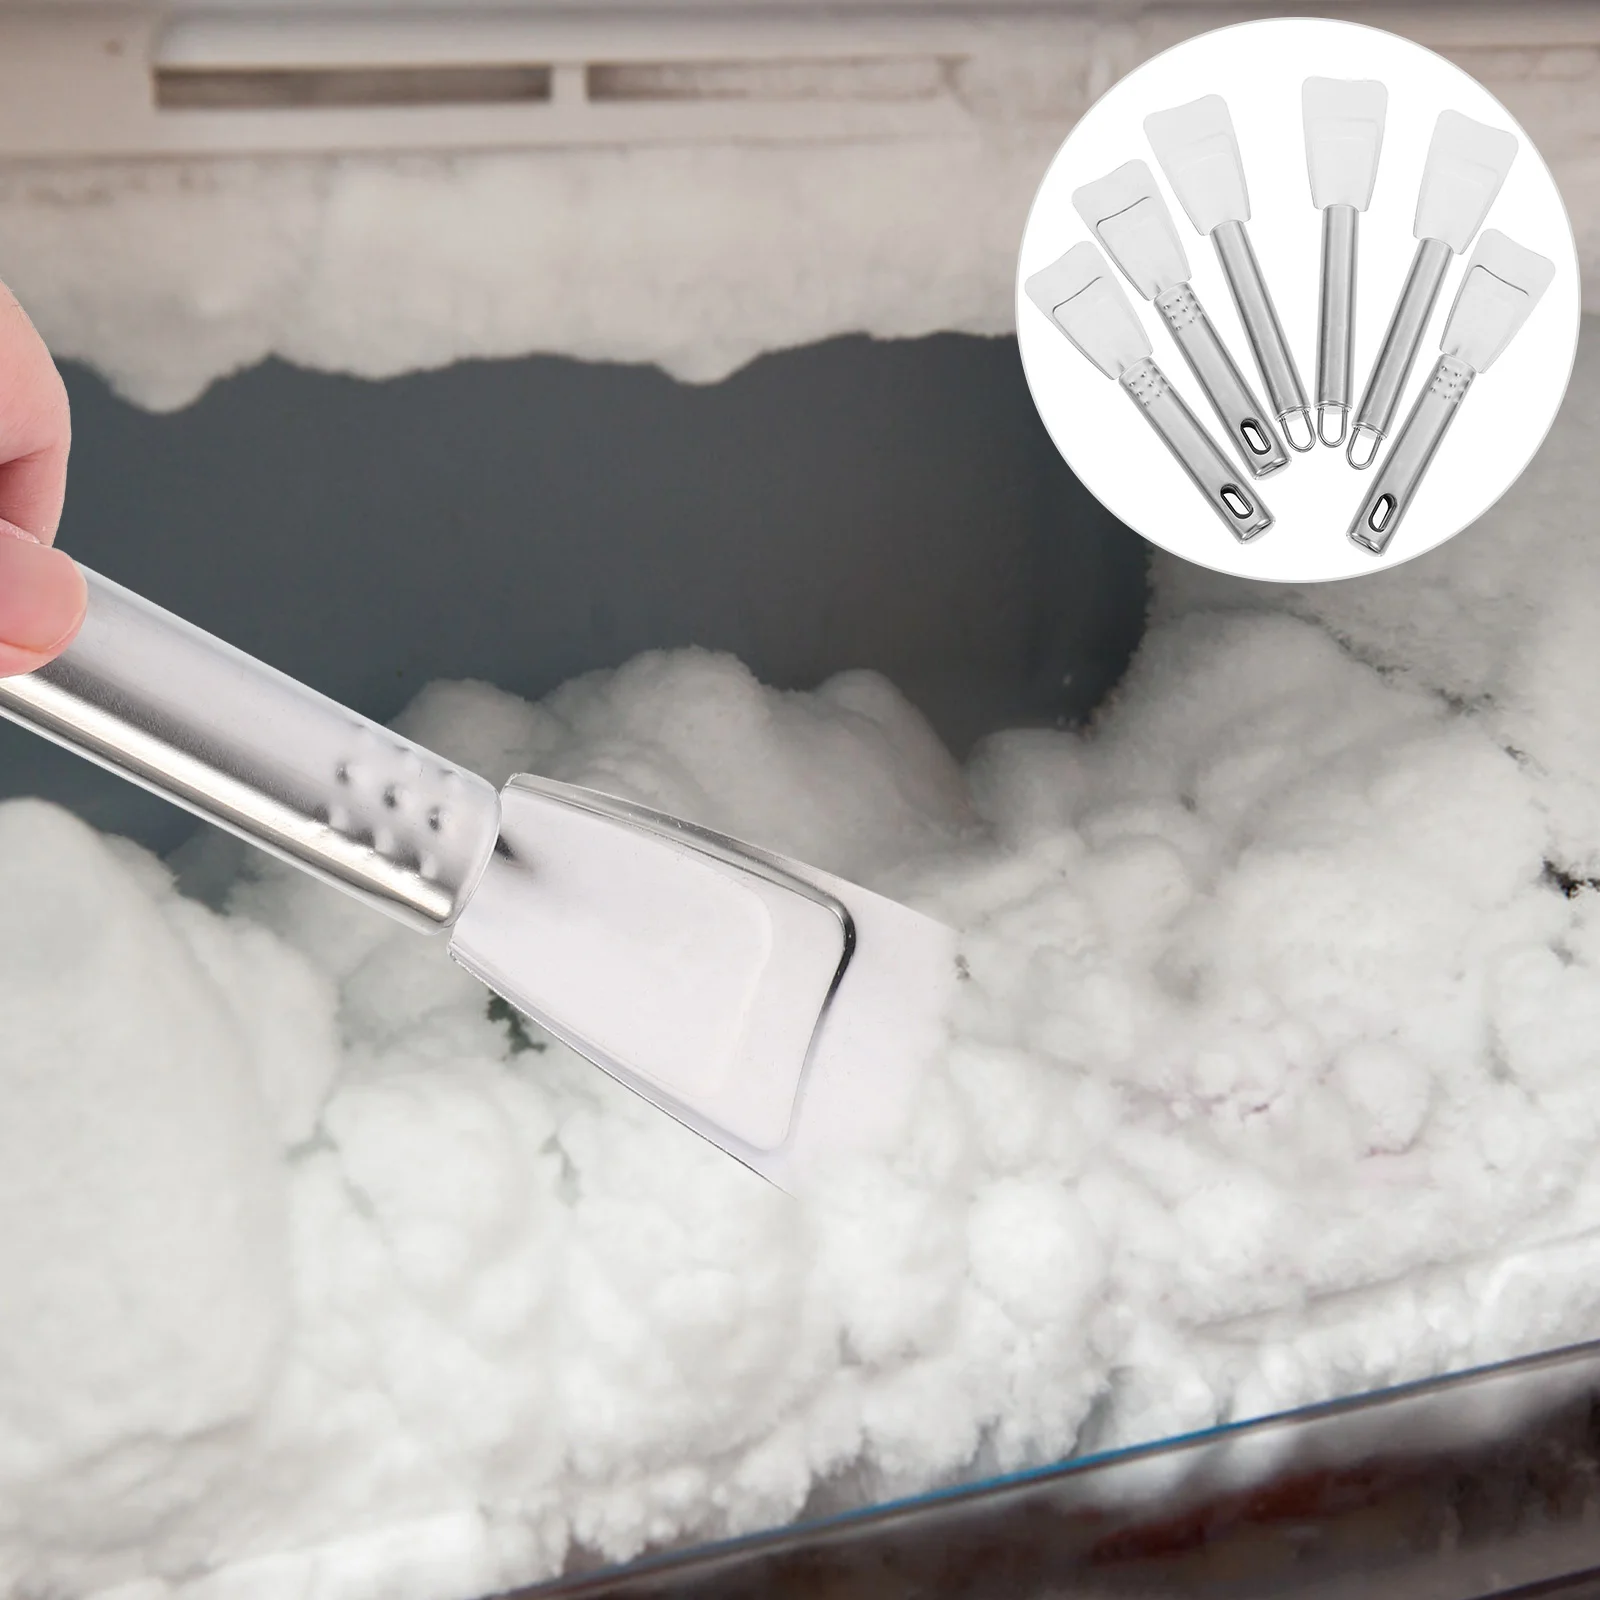 

6 Pcs Stainless Steel Ice Freezer Removal Scoop Handheld Refrigerator Defroster Small Tools Fridge Deicing Scraper